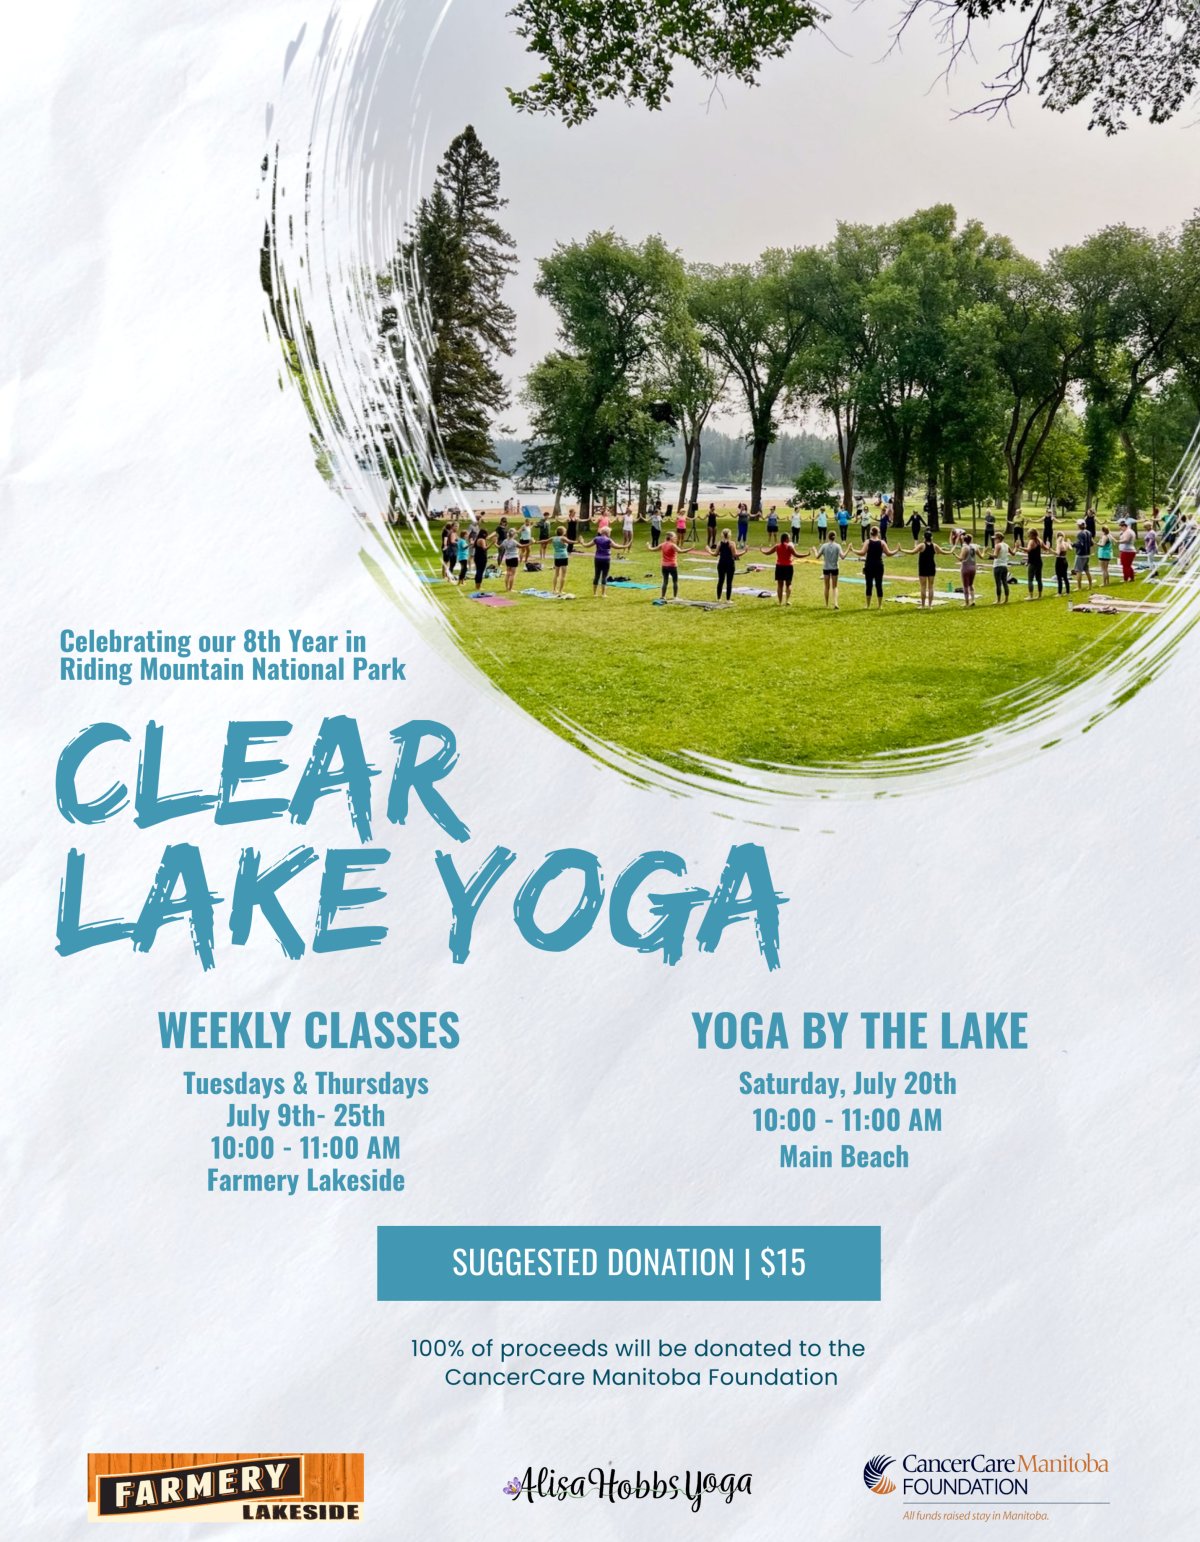 Yoga by the Lake - image